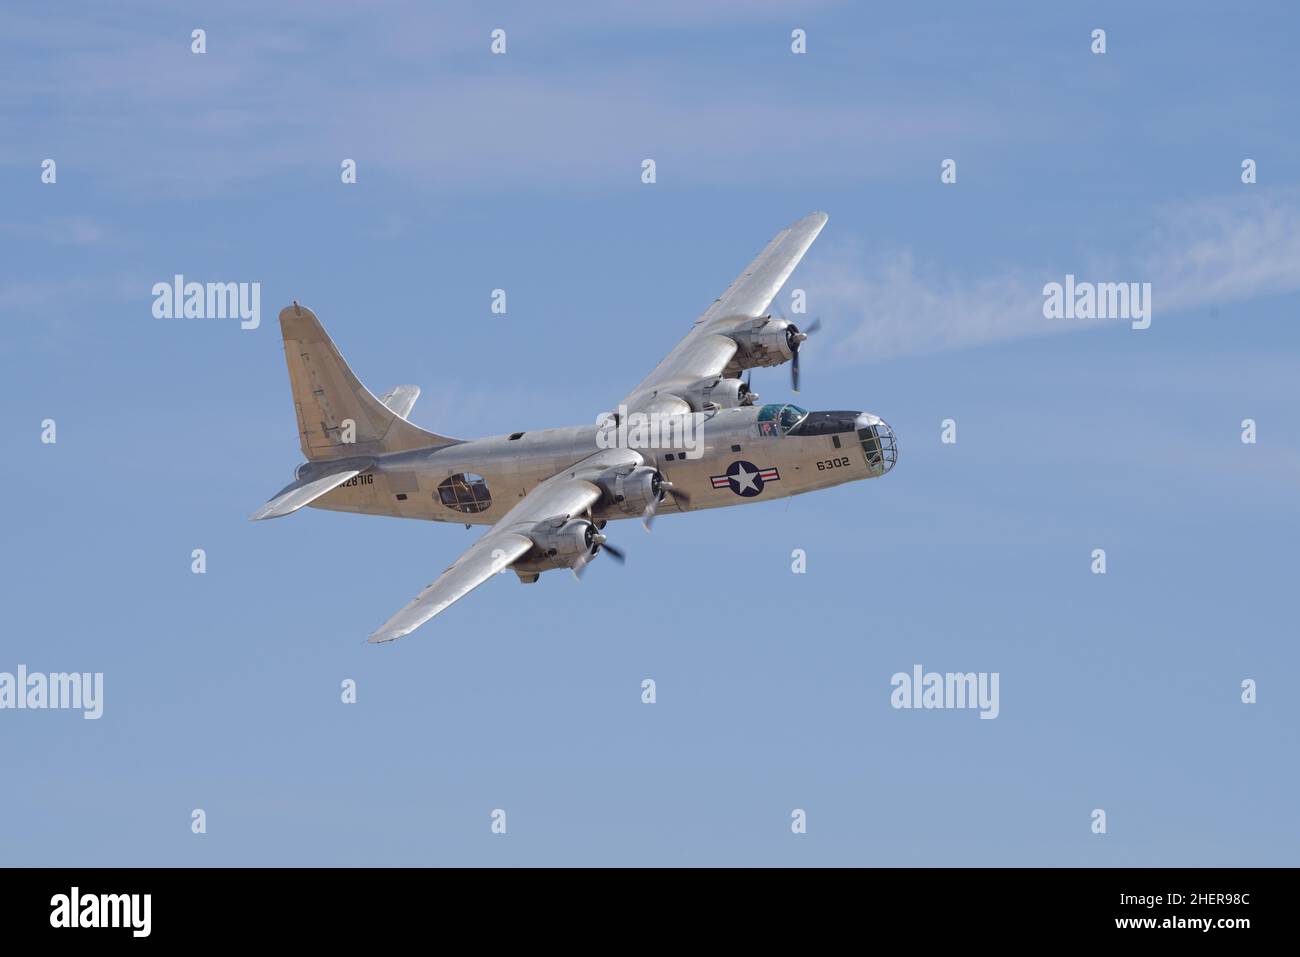 Consolidated PB4Y-2 Privateer (registration N2871G) shown during a flight demo. Stock Photo